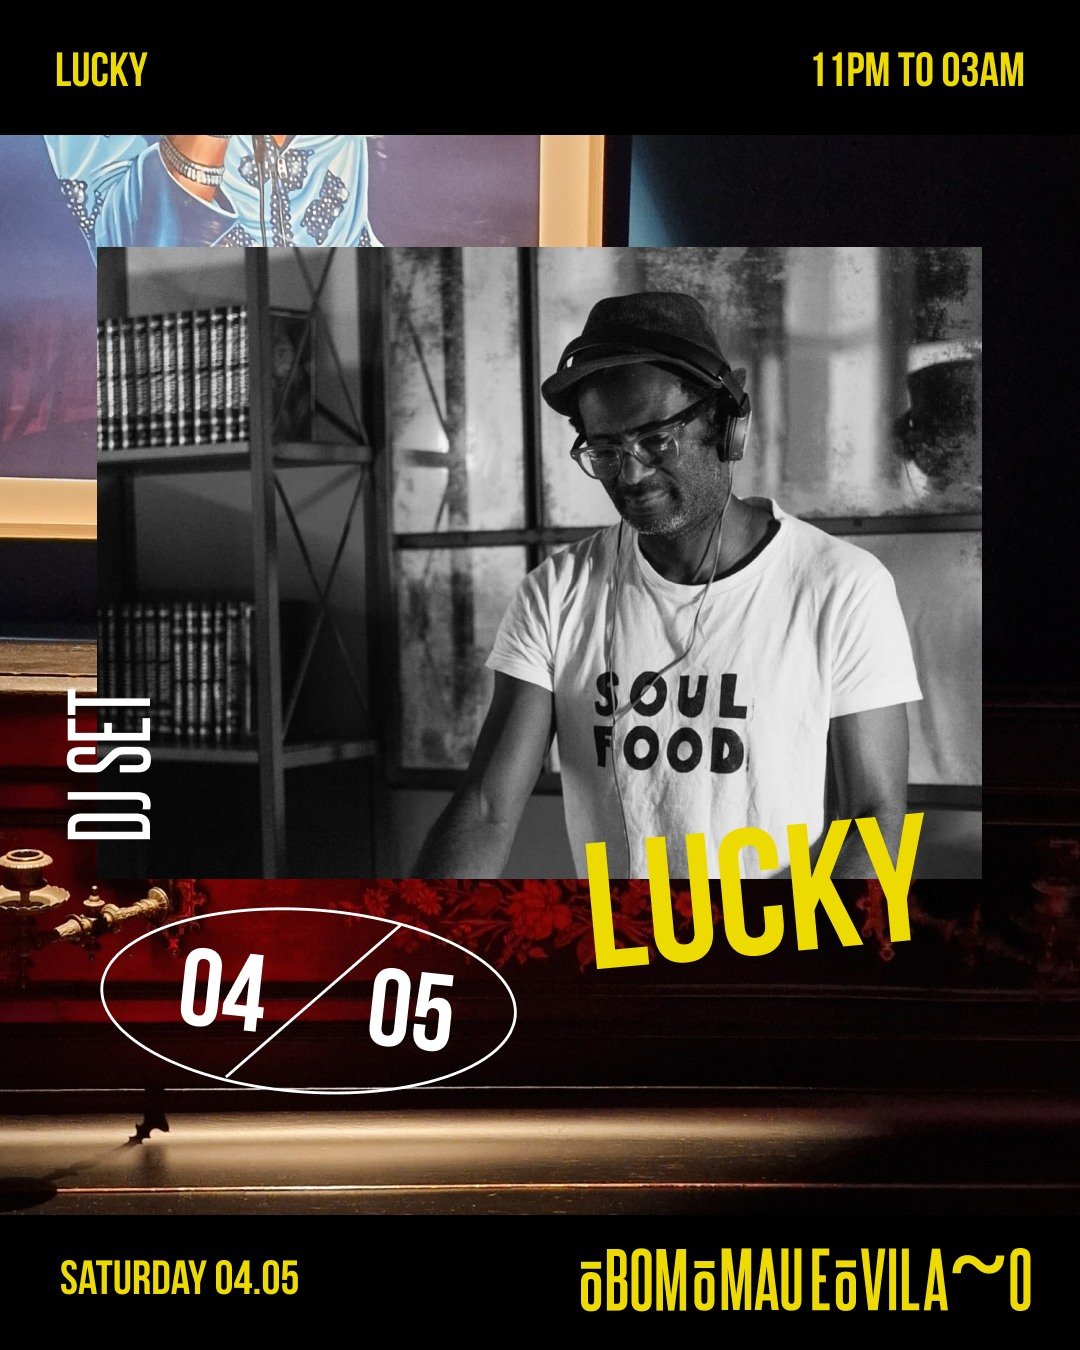 From the Congo to the streets of Lisbon since 1991, Luquebano Afonso, better known as DJ Lucky, lights up the night with his eclectic sets. From jazz to reggae, an unparalleled musical journey. All you have to do is feel the rhythm, the vibe, the res